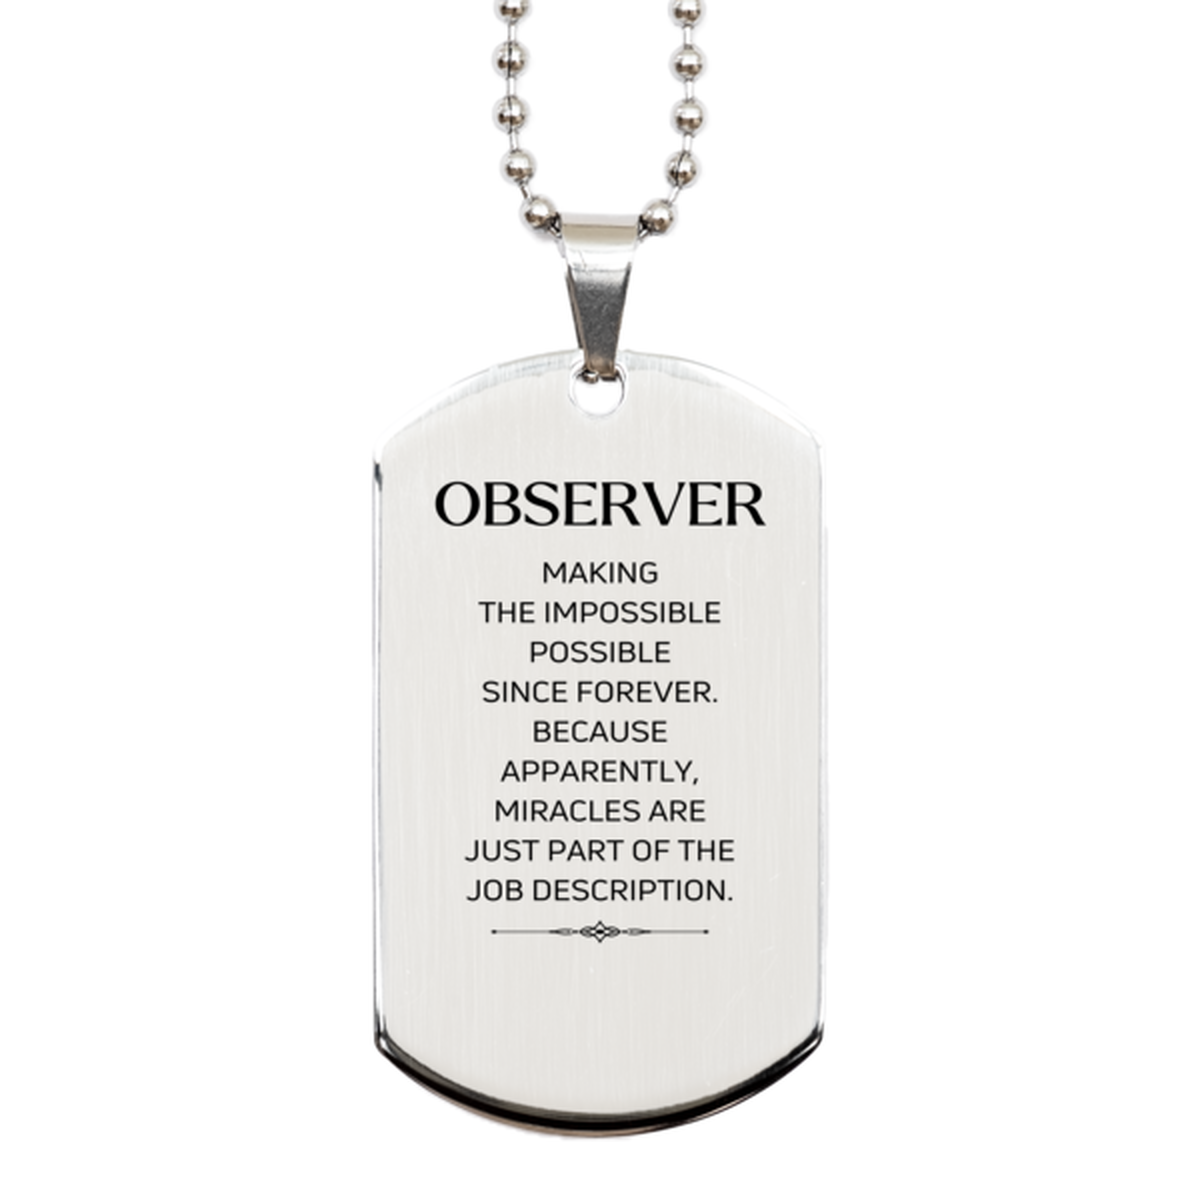 Funny Observer Gifts, Miracles are just part of the job description, Inspirational Birthday Silver Dog Tag For Observer, Men, Women, Coworkers, Friends, Boss